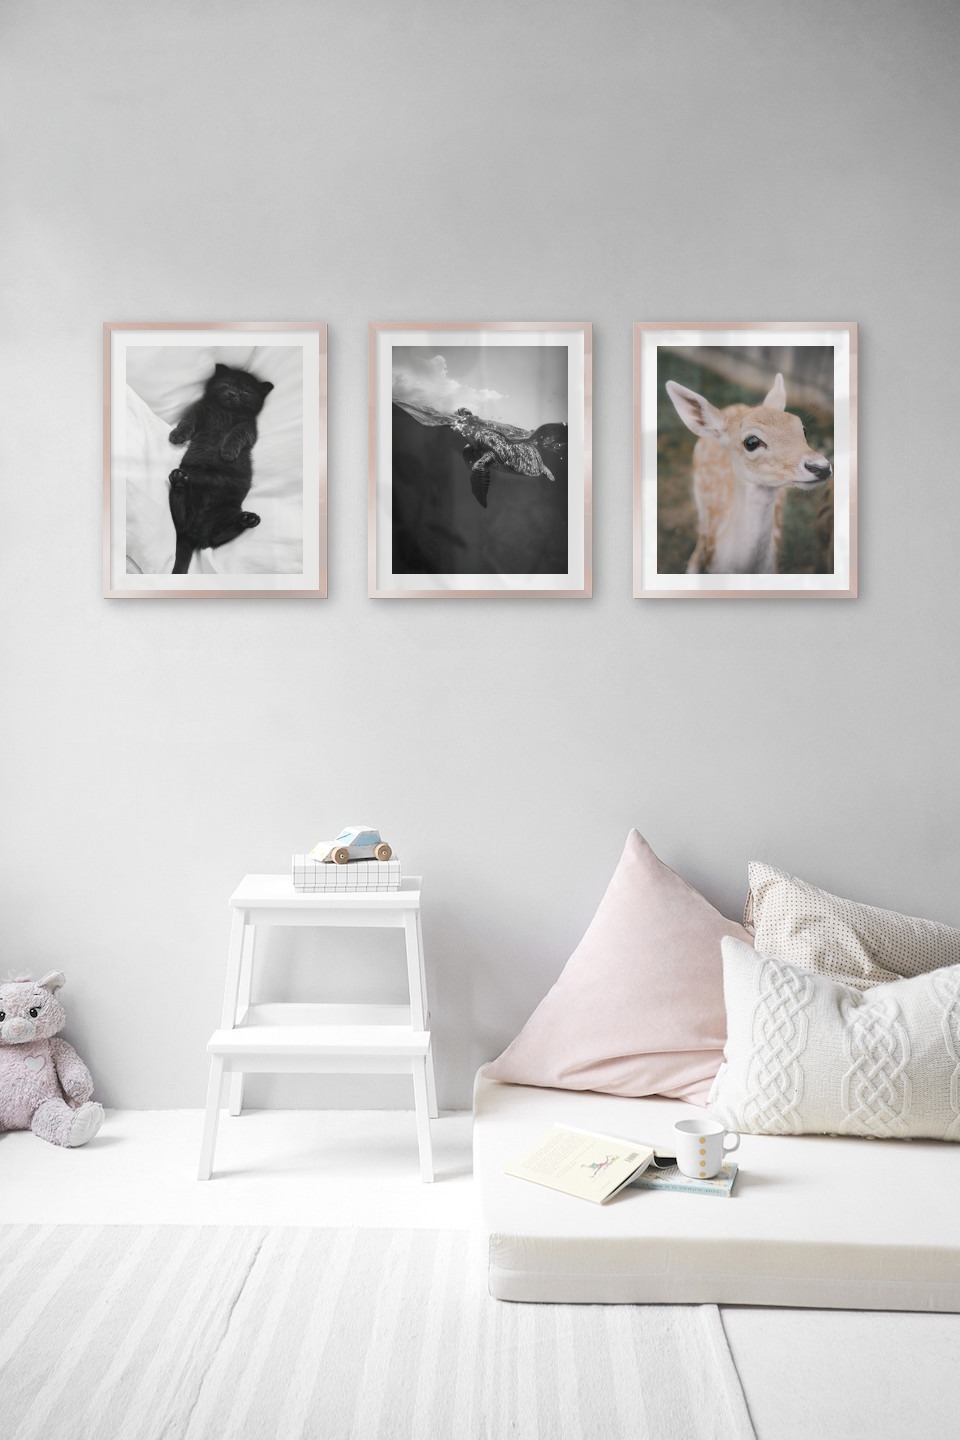 Gallery wall with picture frames in copper in sizes 40x50 with prints "Cat in bed", "Turtle" and "Deer"